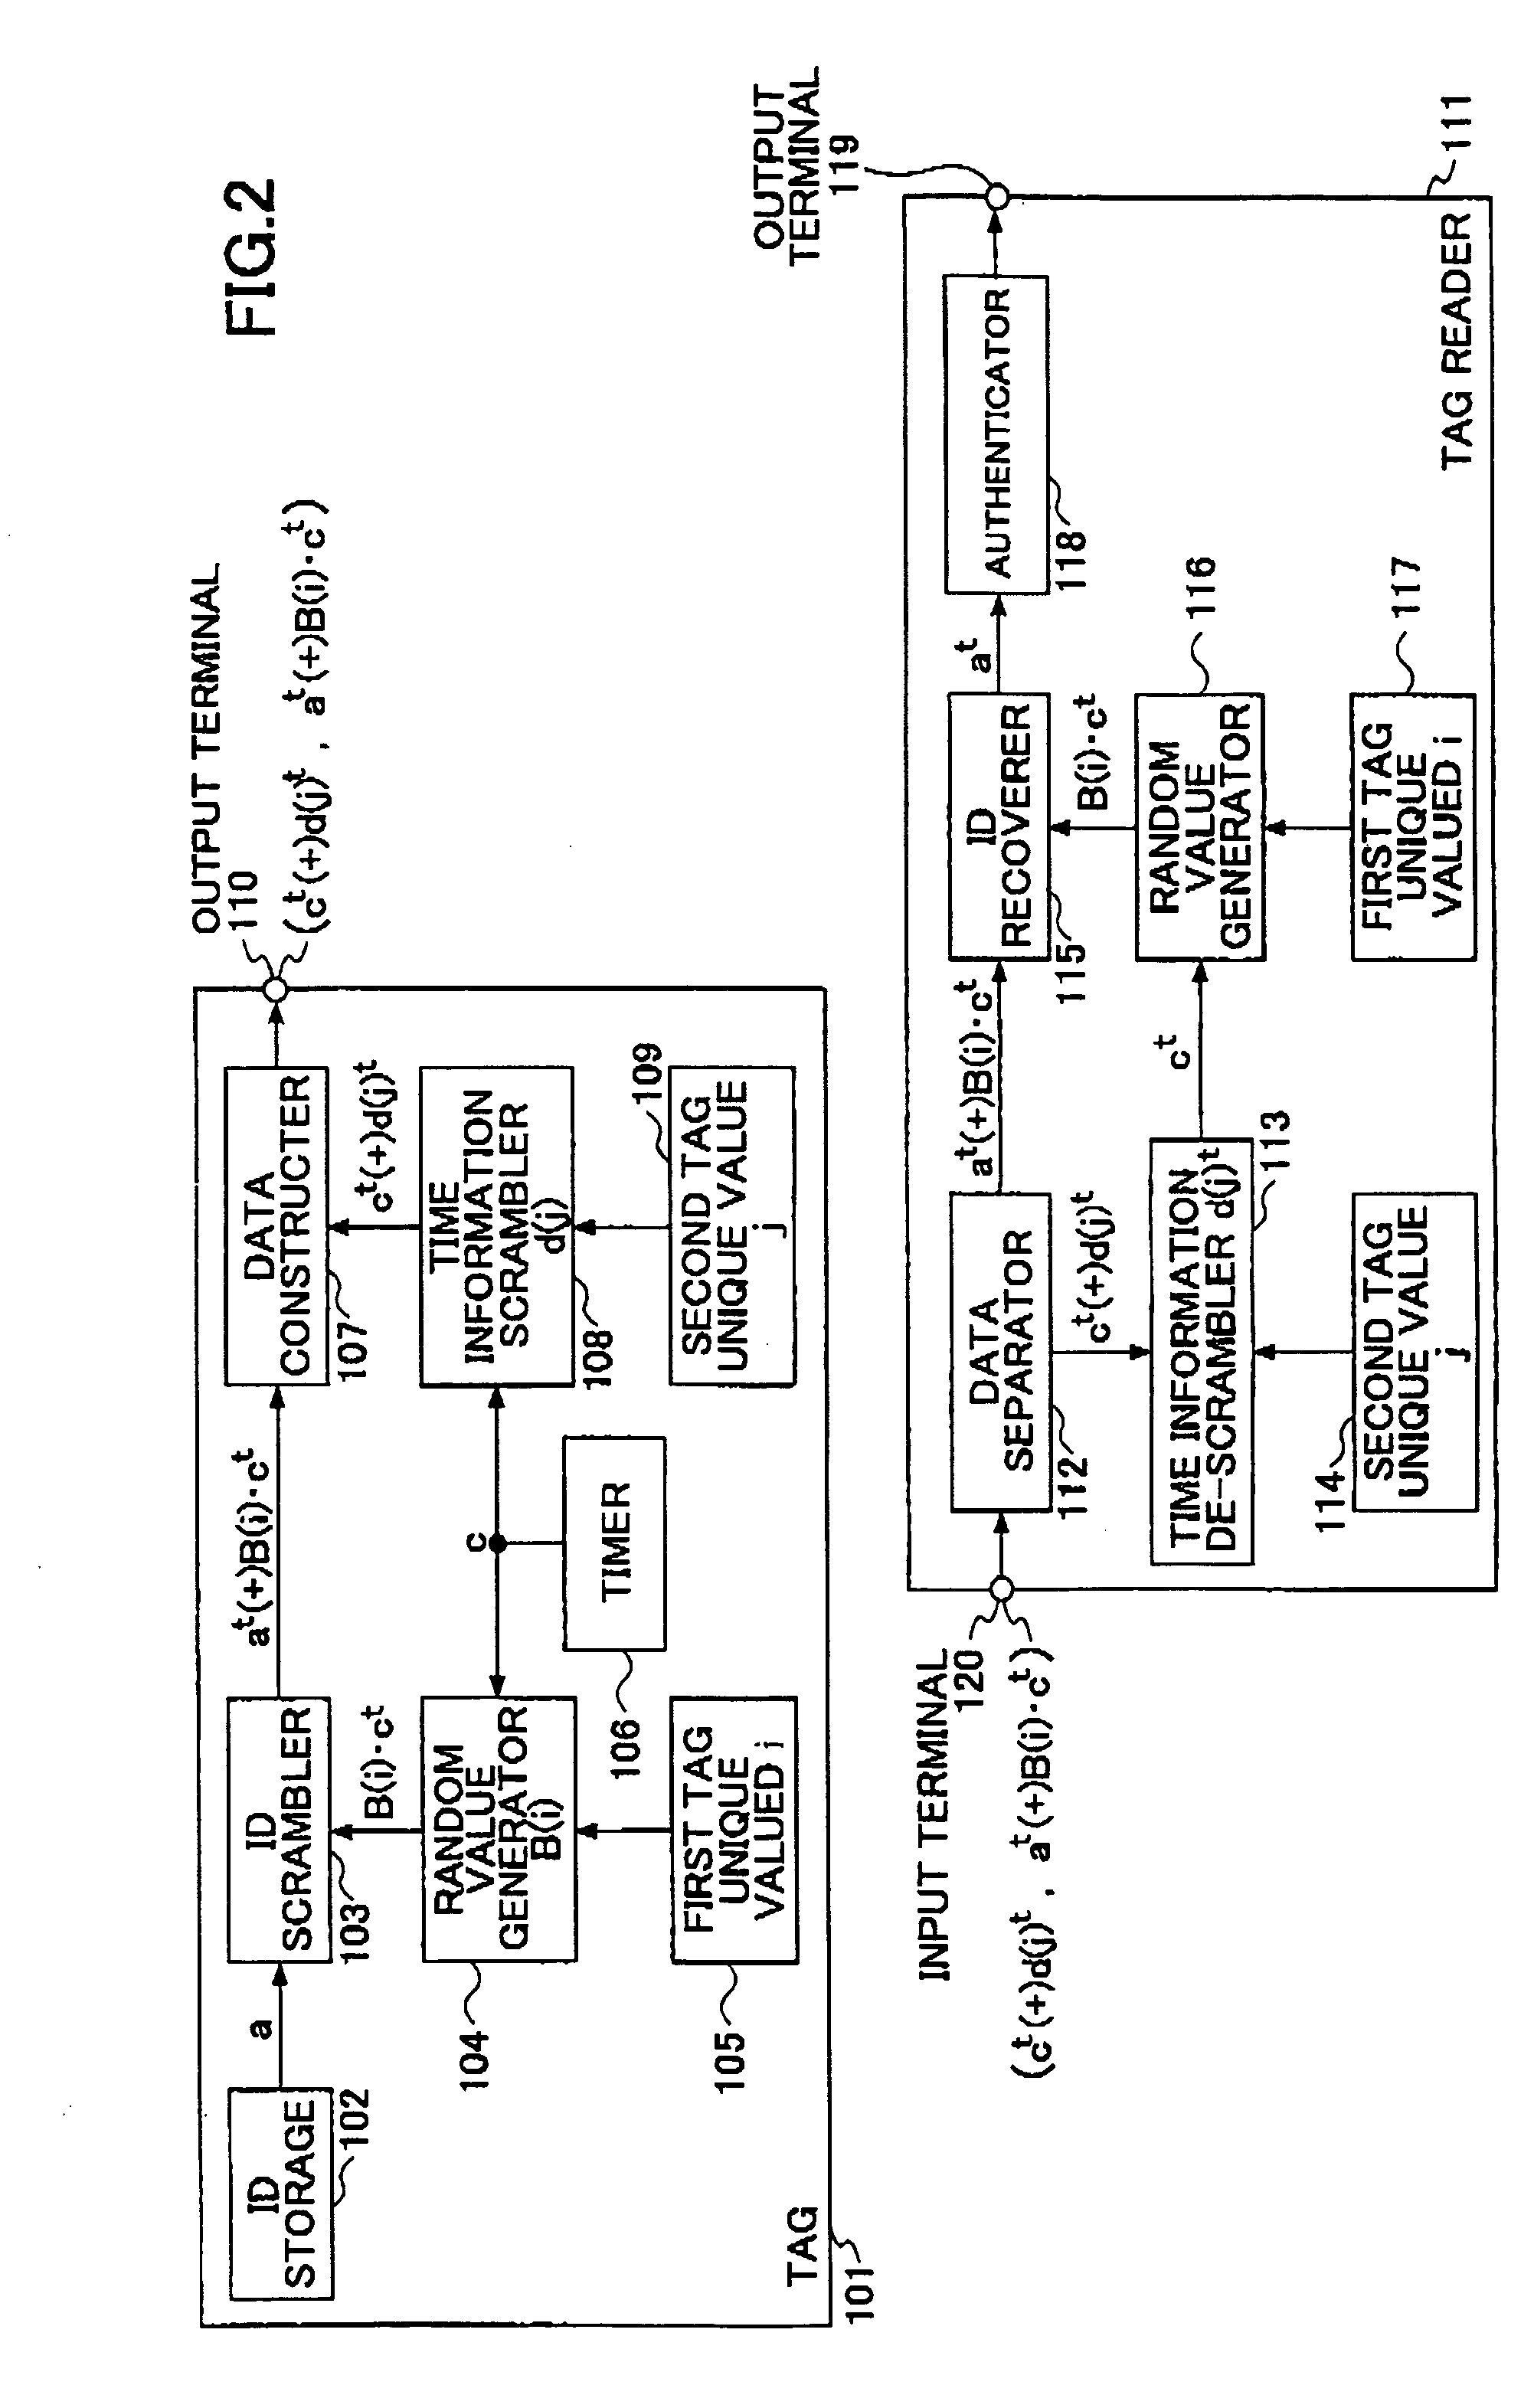 ID tag, a tag reader, ID tag transmitting and recovering methods, and a tag manager